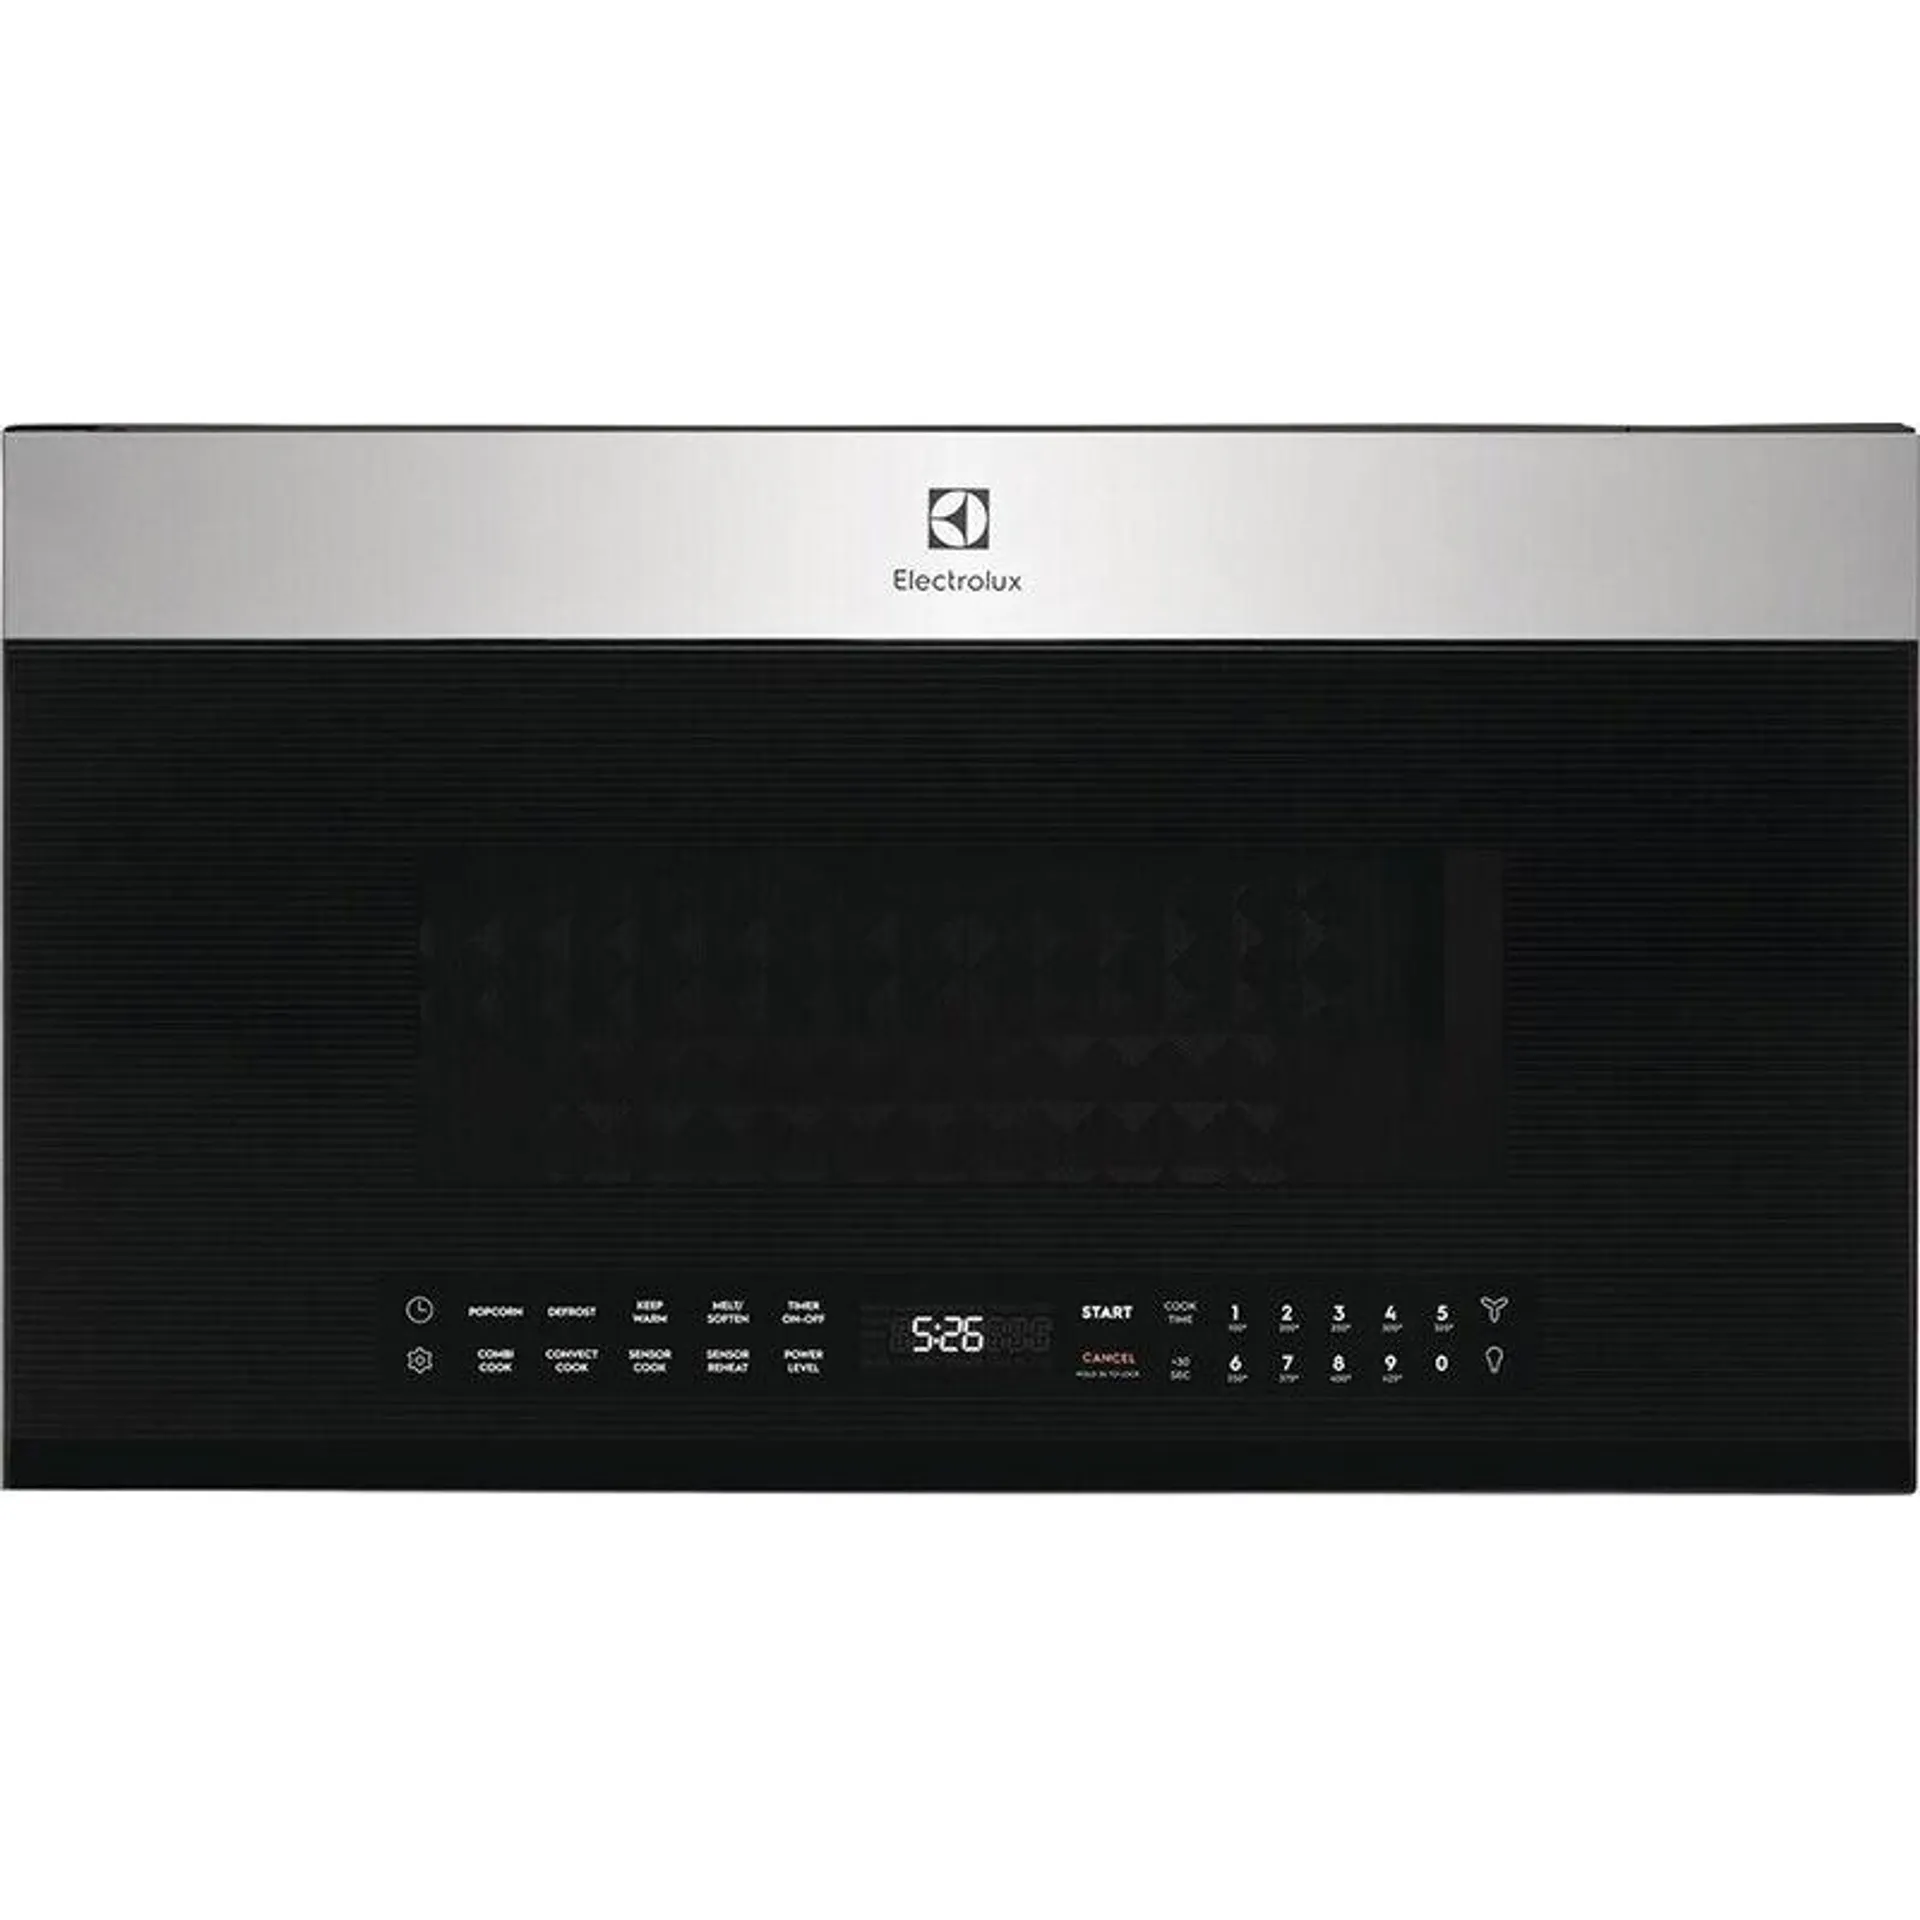 Electrolux 30" 1.9 Cu. Ft. Over-the-Range Microwave with 10 Power Levels & Sensor Cooking Controls - Stainless Steel